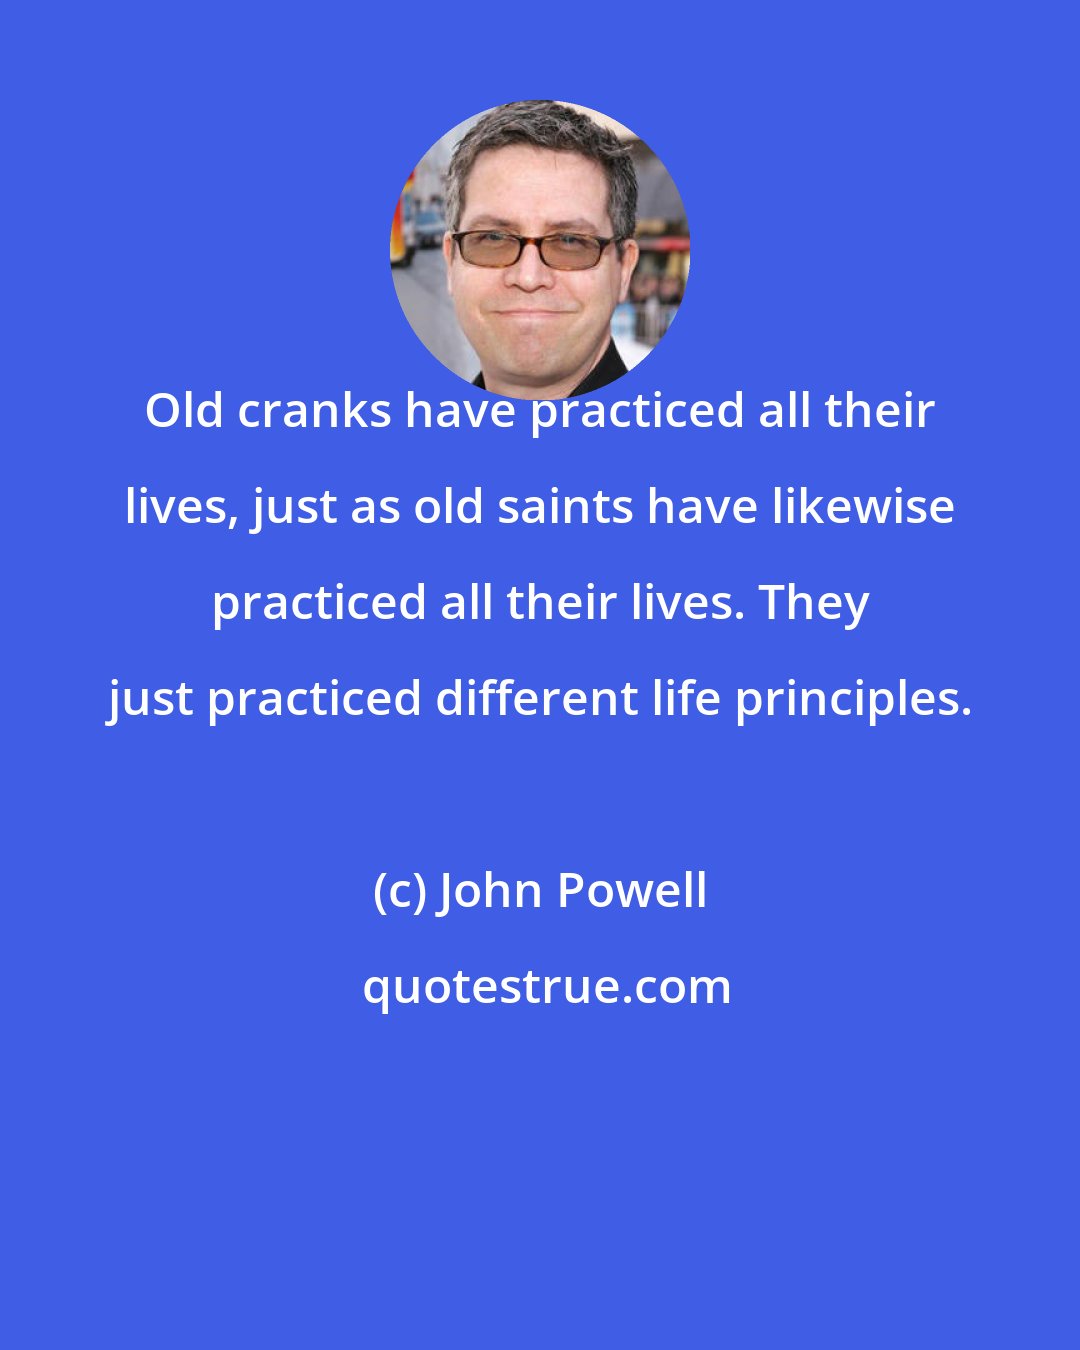 John Powell: Old cranks have practiced all their lives, just as old saints have likewise practiced all their lives. They just practiced different life principles.